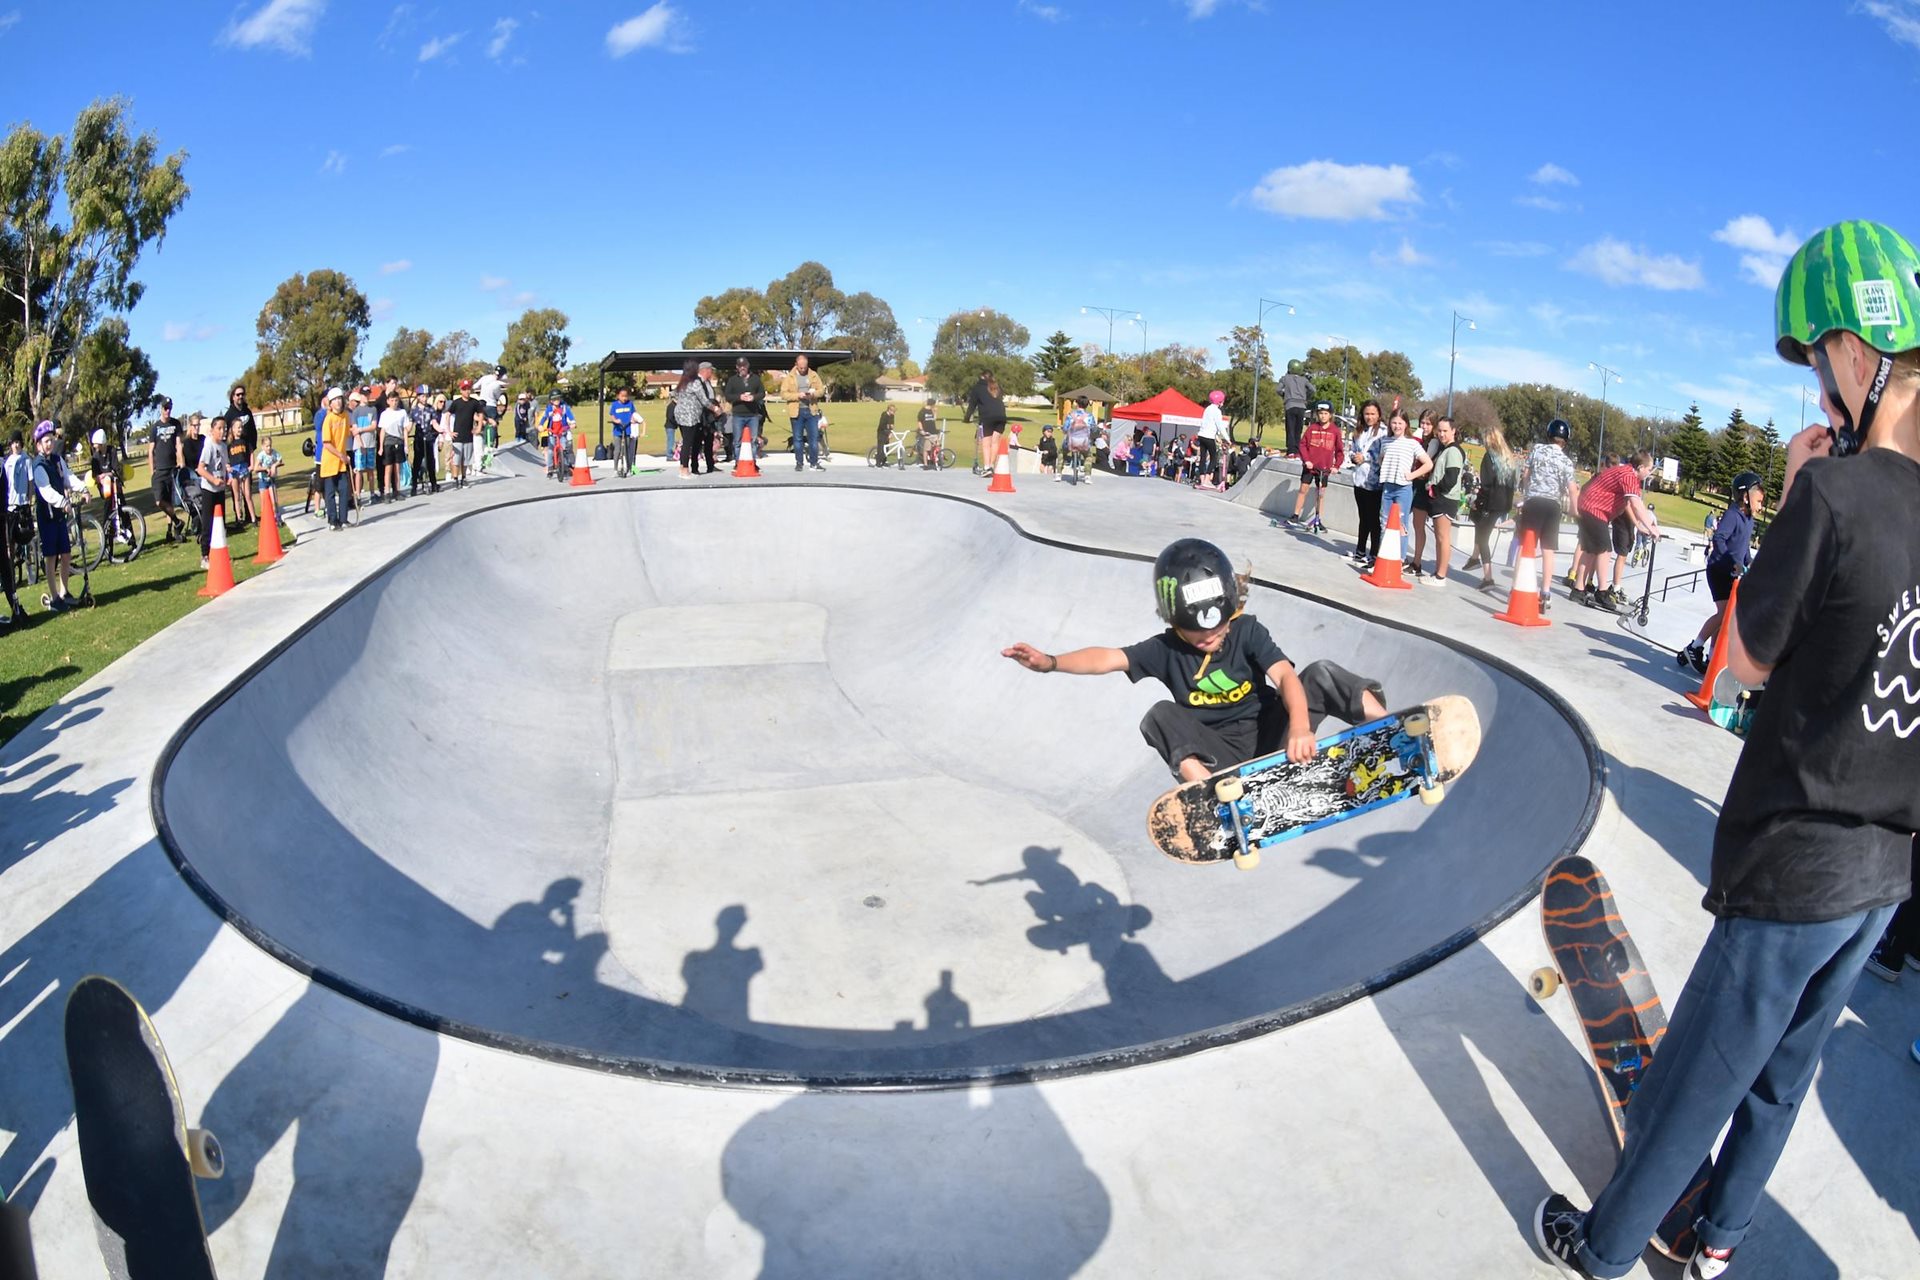 Skateboarder performing at a competition in a bowl.